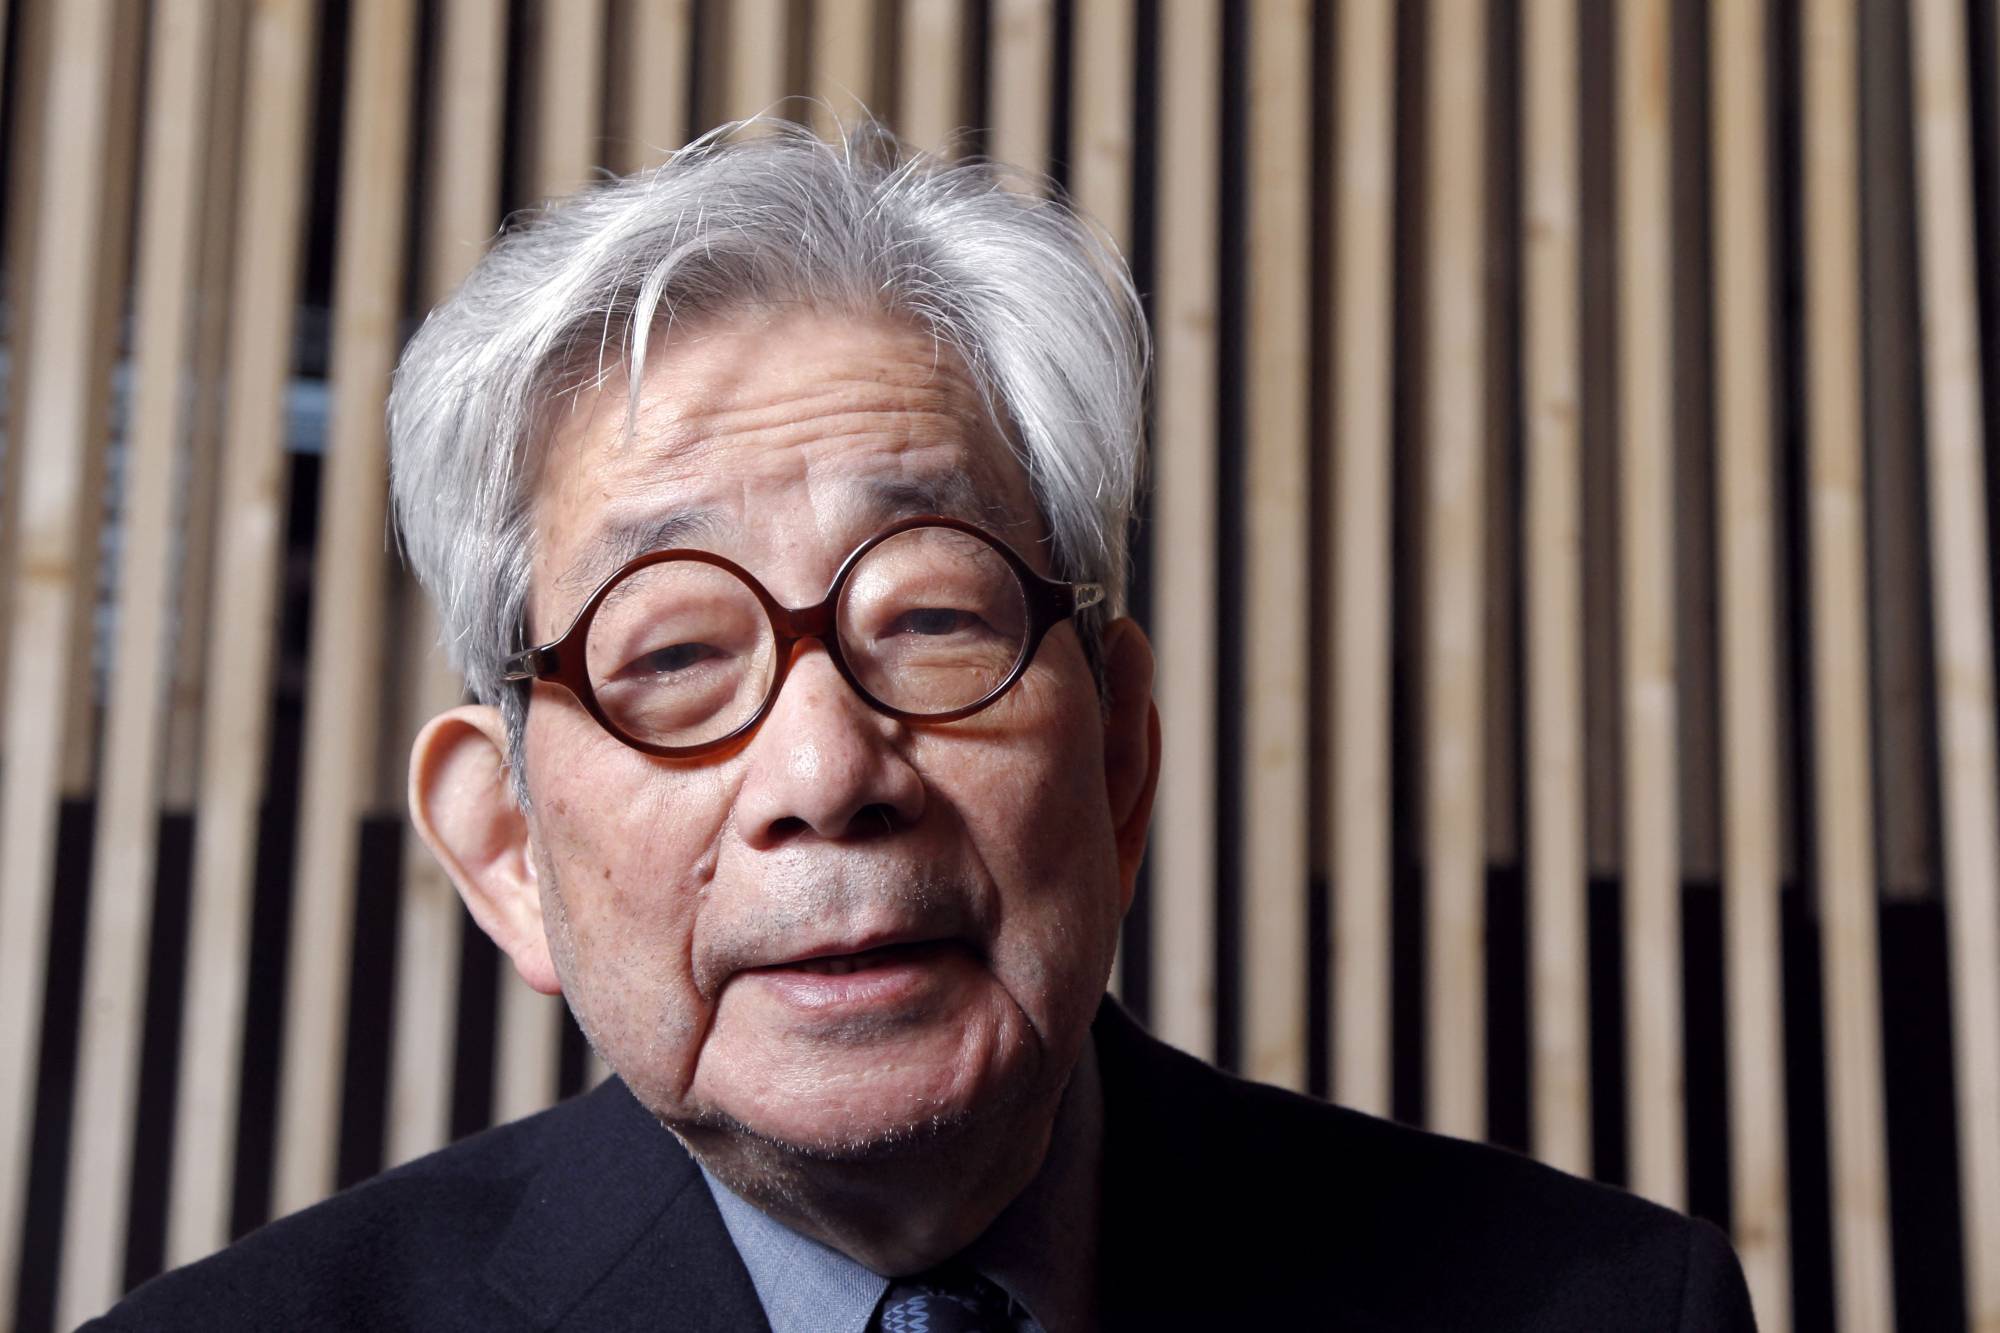 Kenzaburo Oe expressed guilt over his initial treatment of his eldest child. | AFP-JIJI